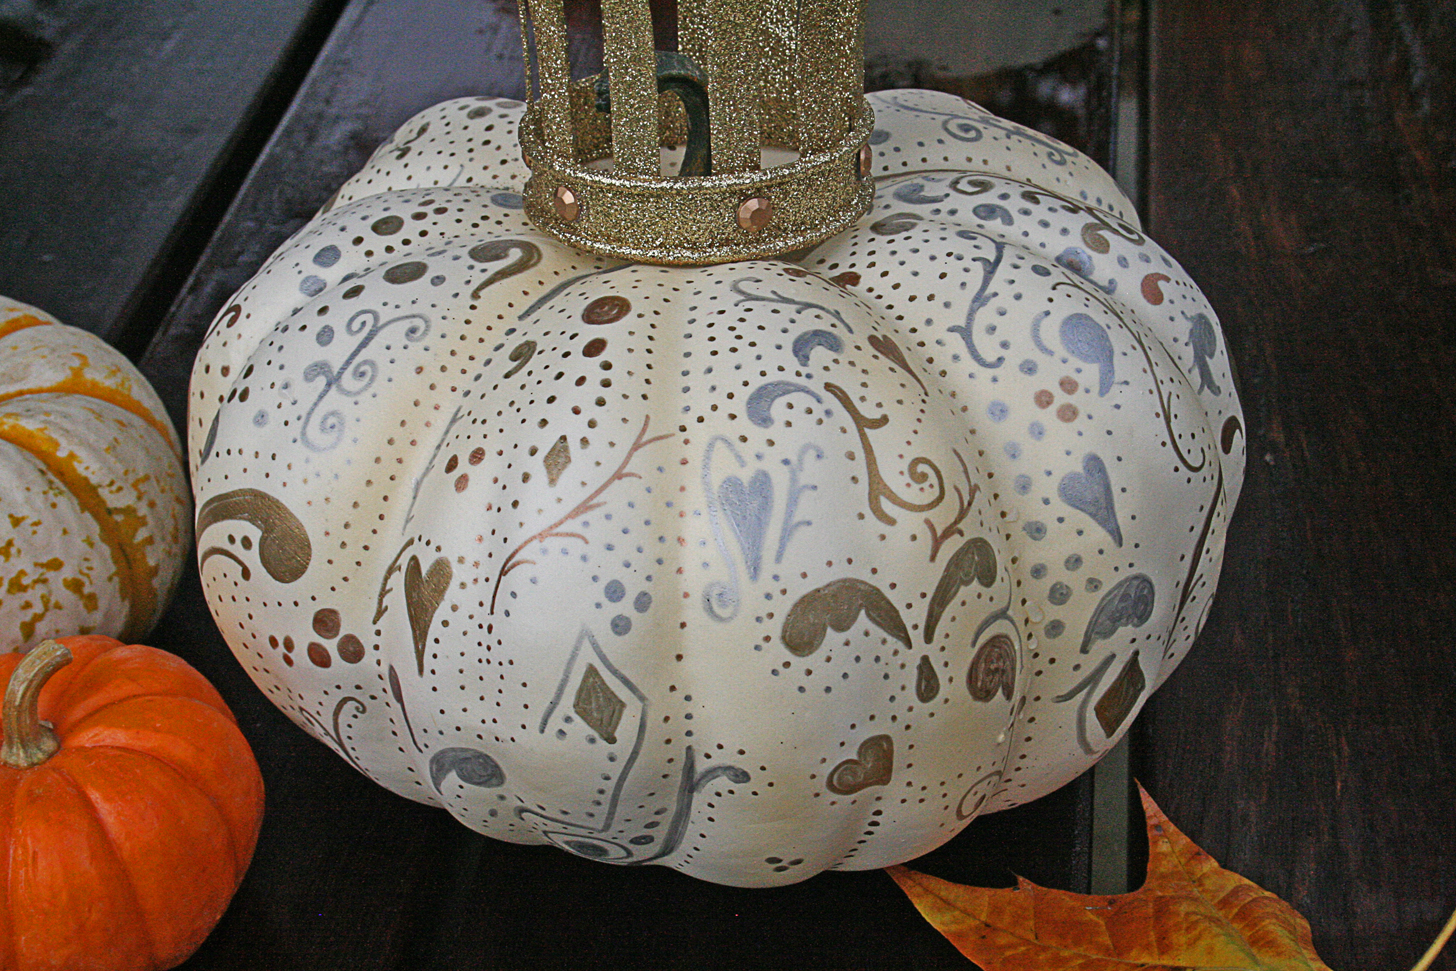 A Royal Pumpkin fit for a Prince or Princess